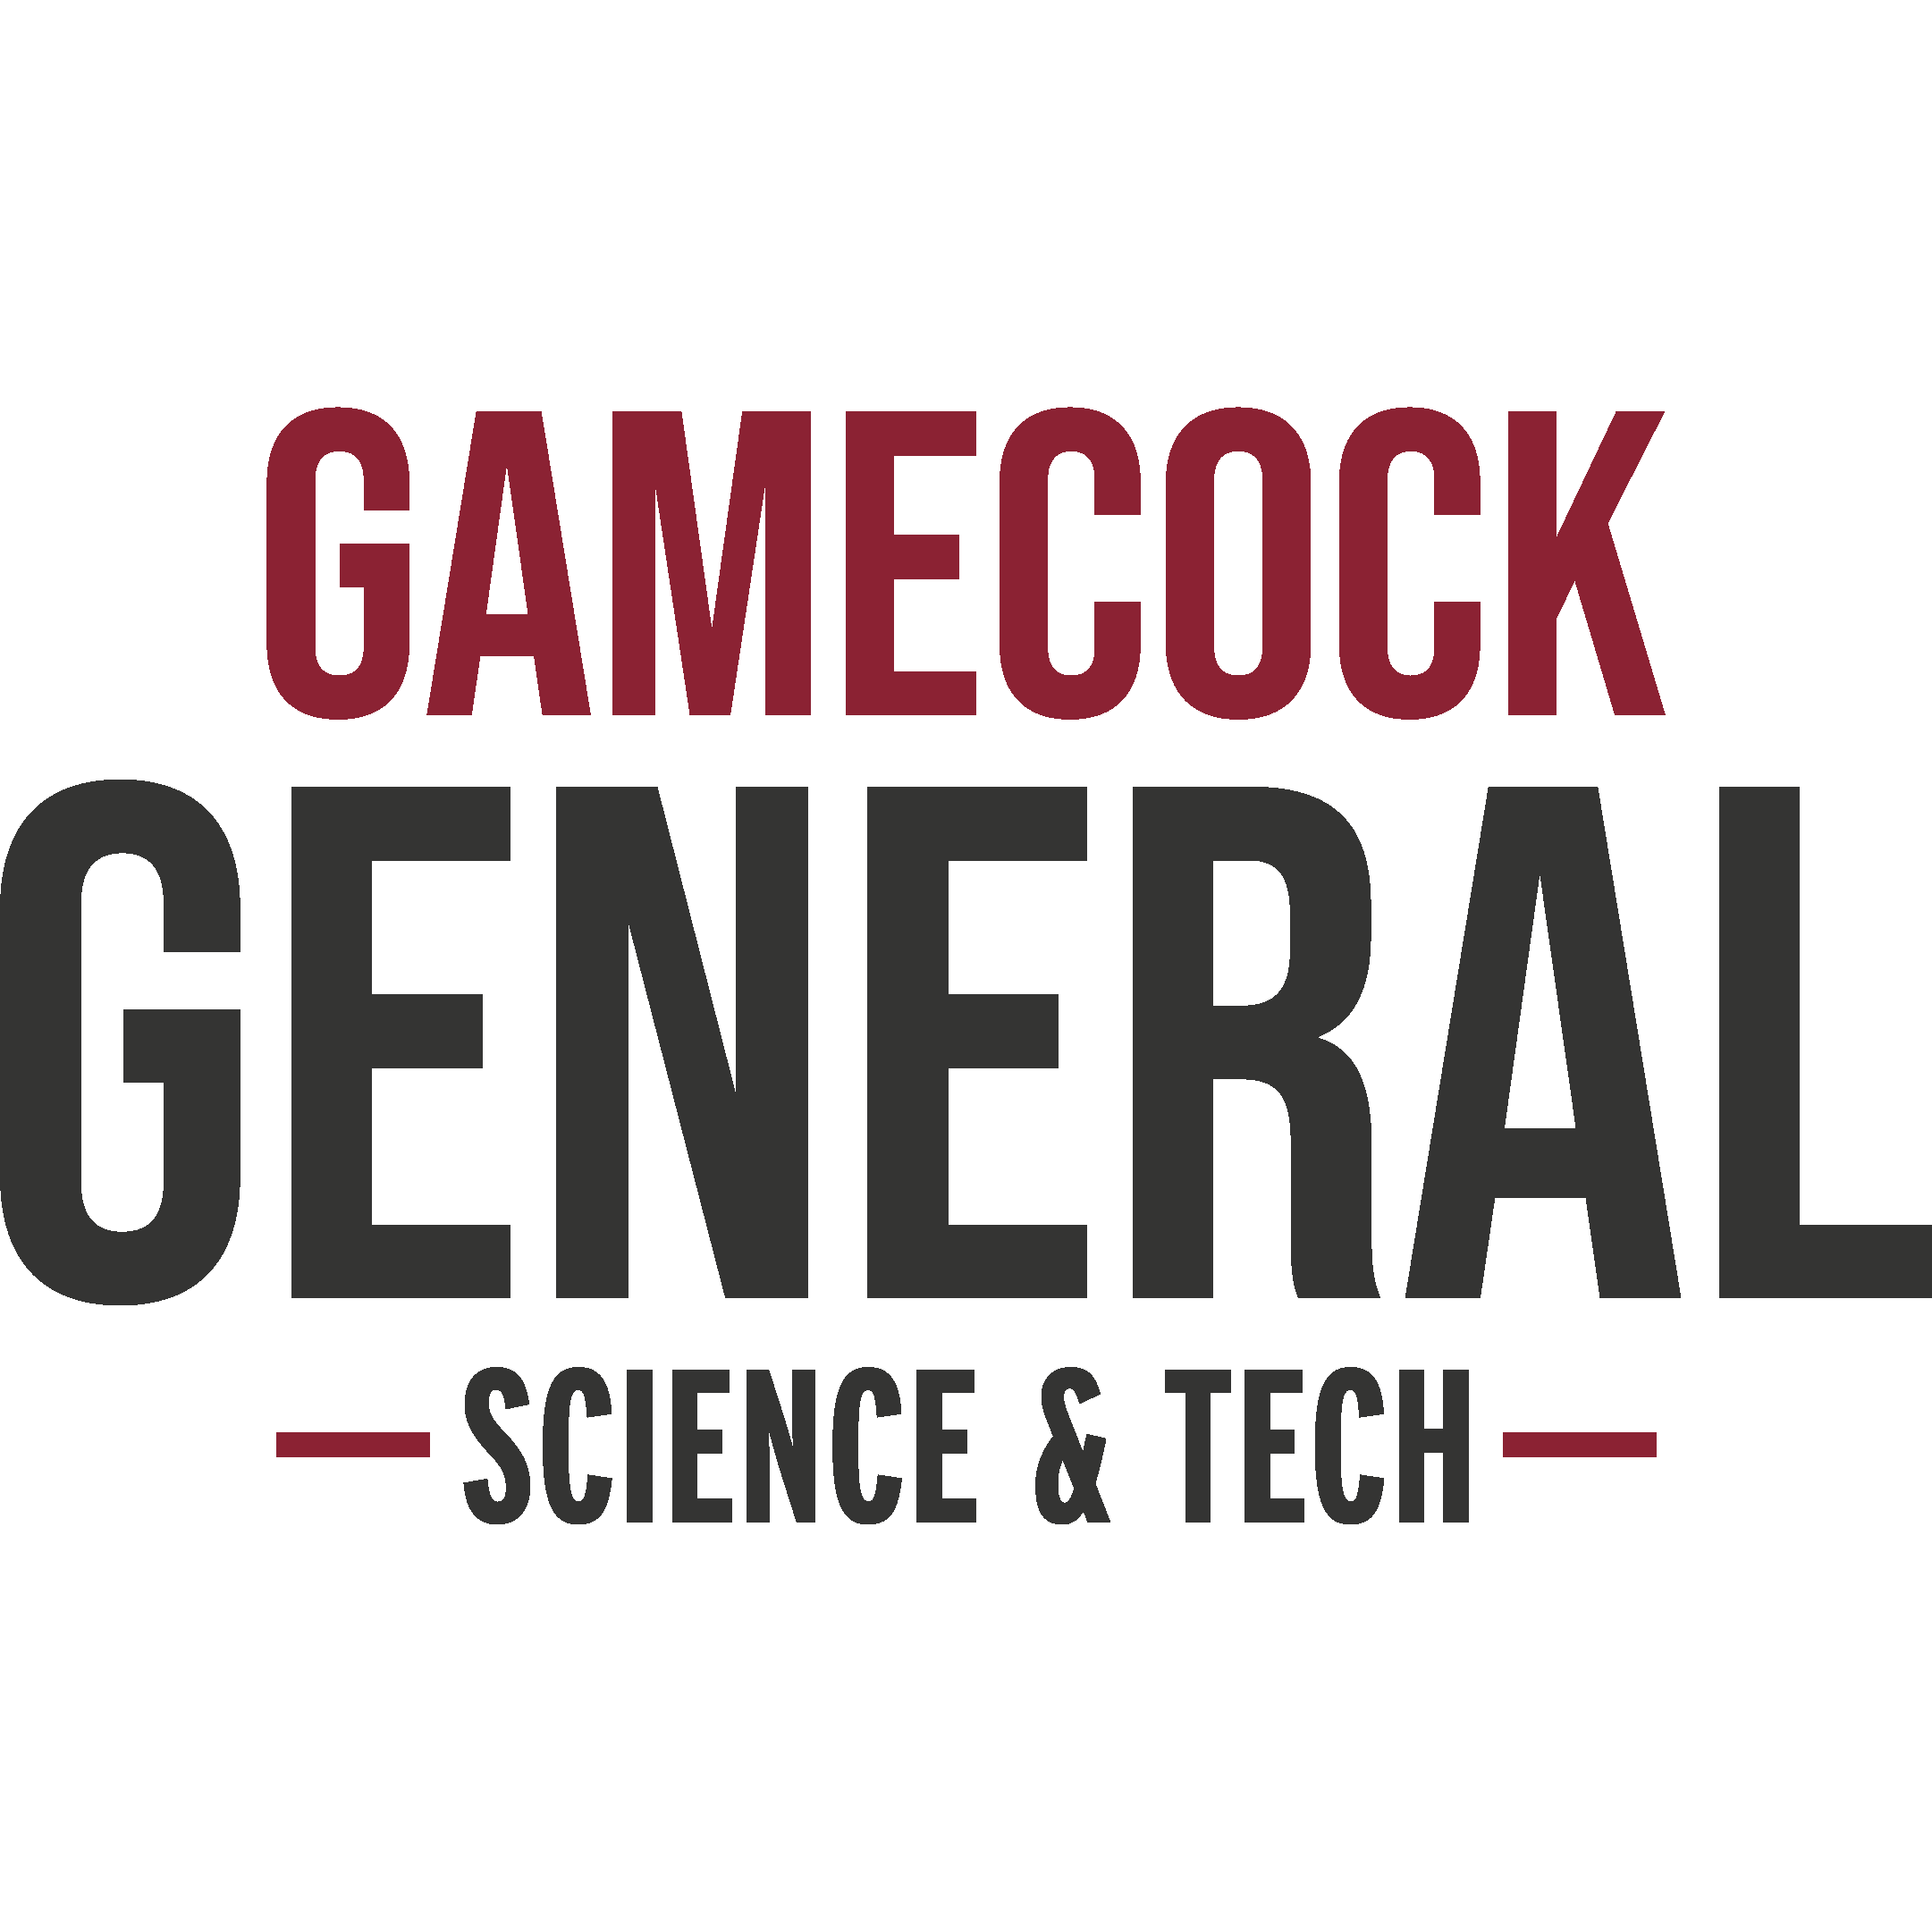 Gamecock General Science & Tech mark